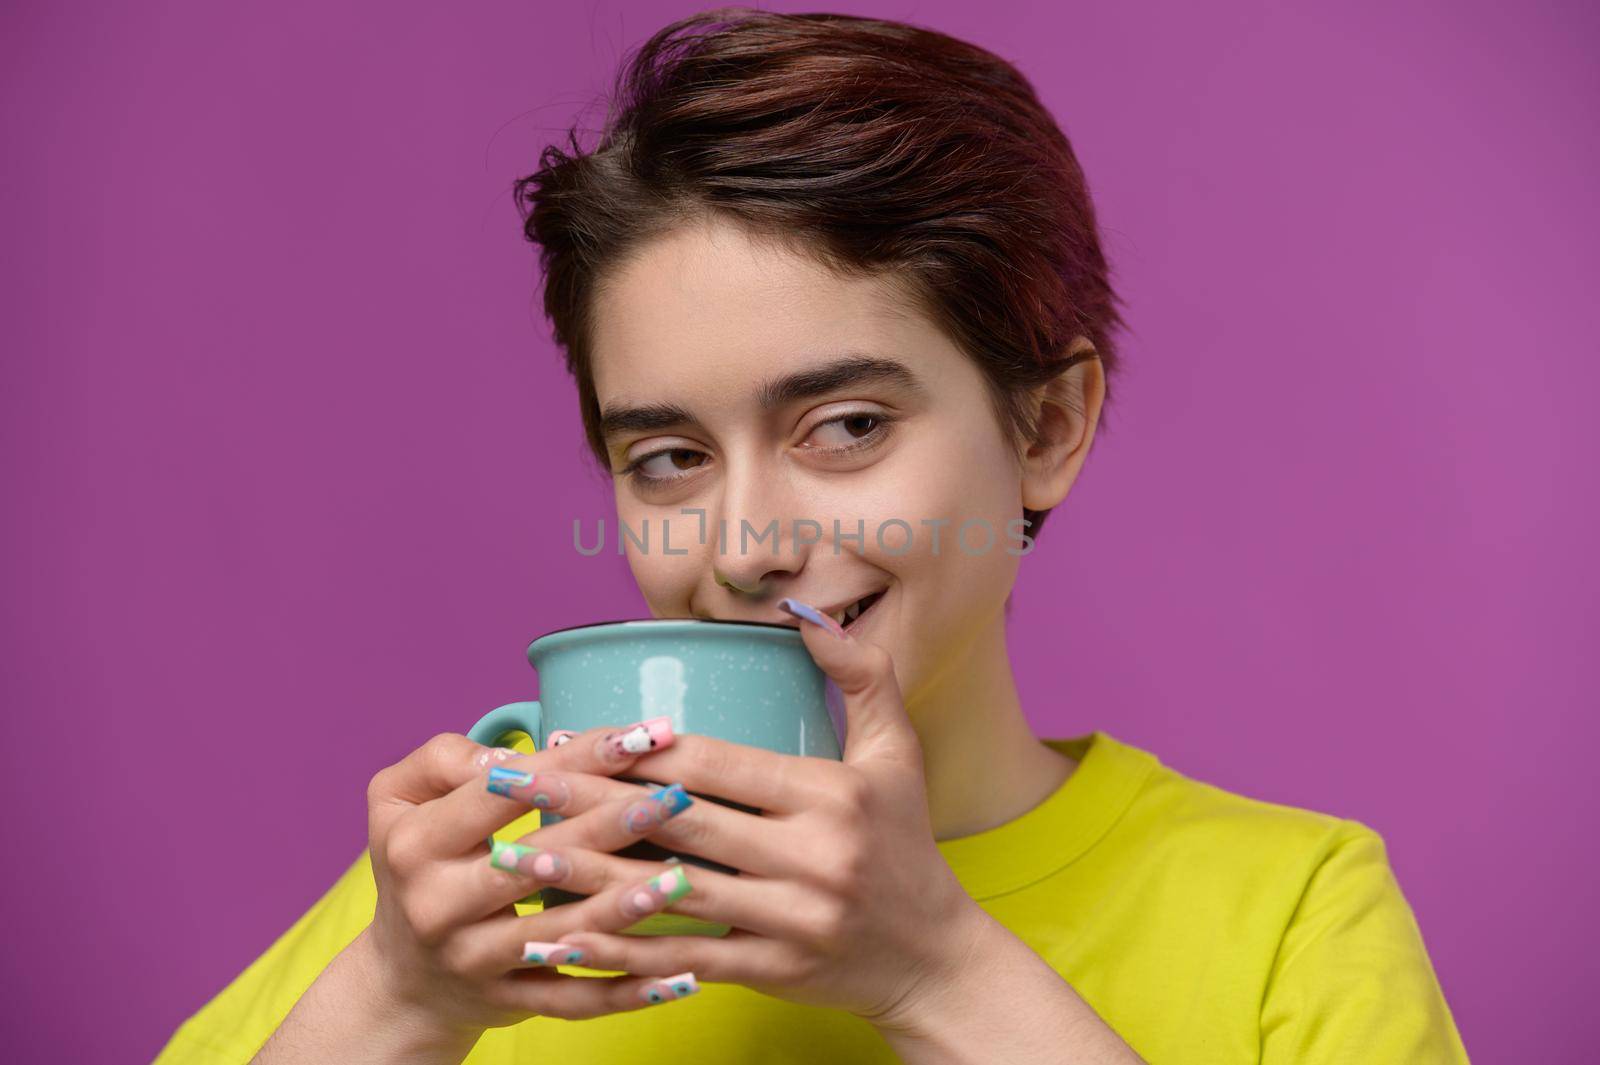 A barely awake pretty brunette enjoys her morning tea or coffee, cheering herself up, studio shot at magenta background